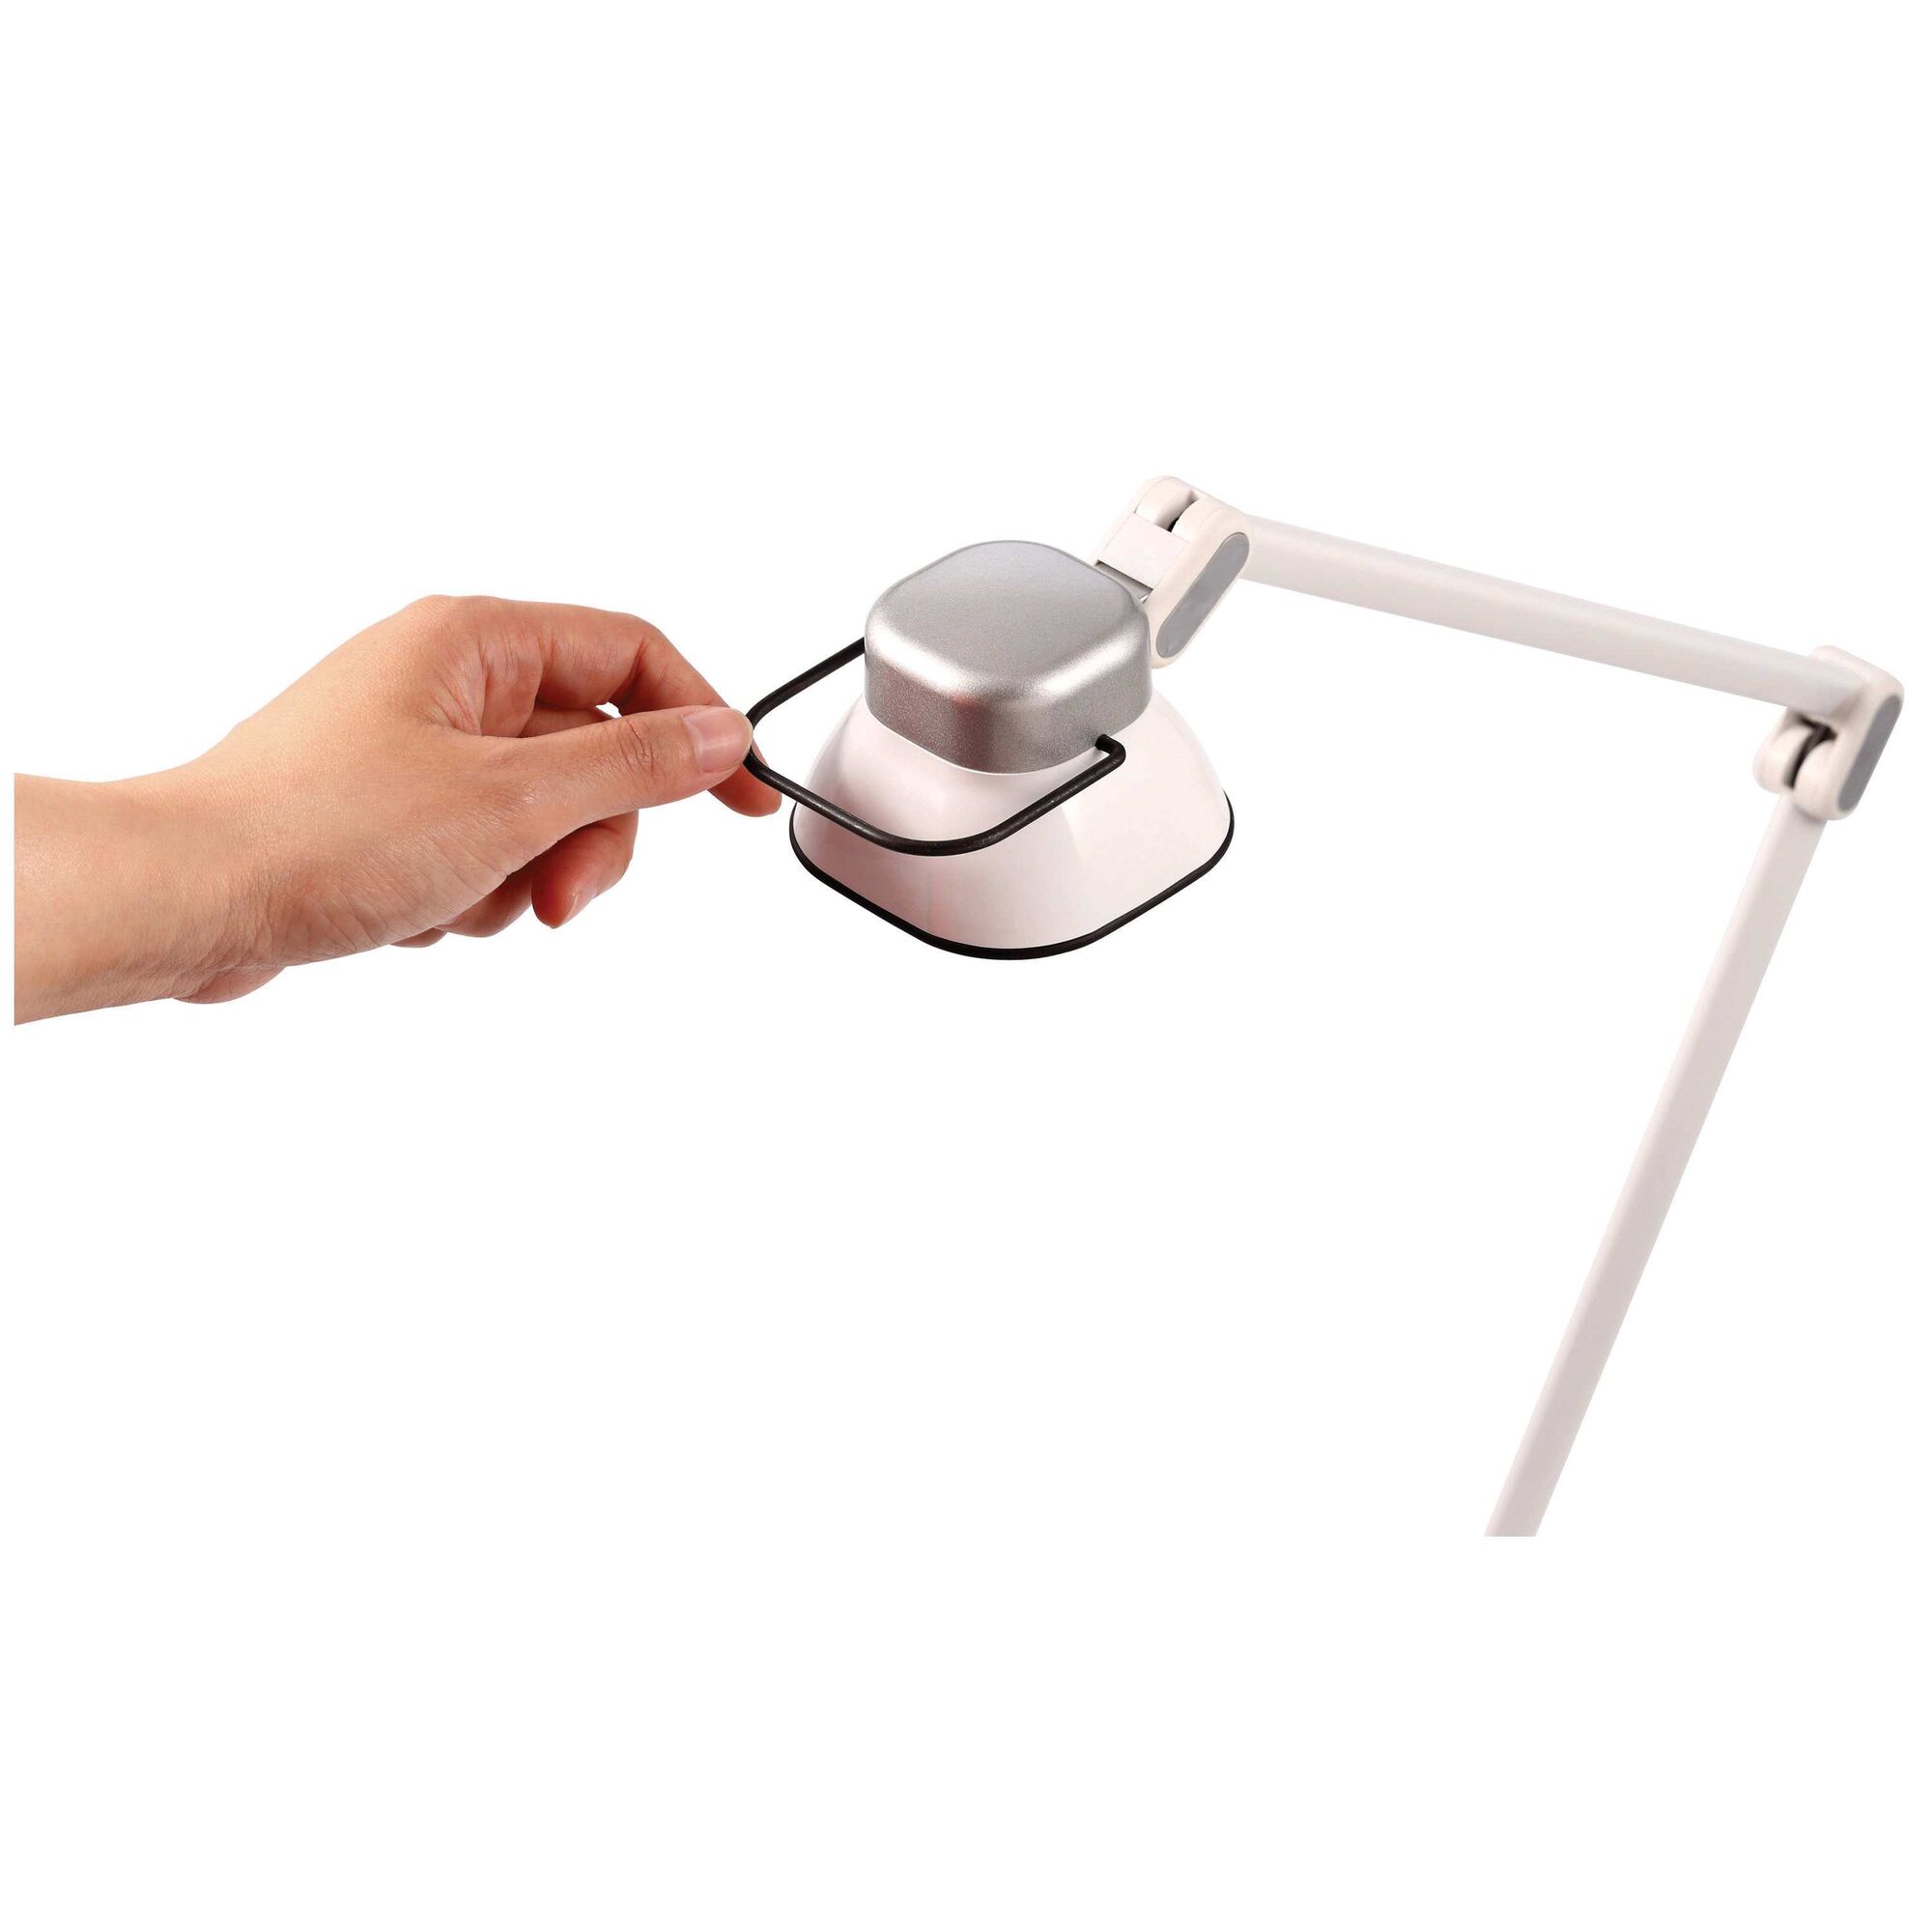 Adjustable arm in elate dual arm L E D desk lamp in white color.